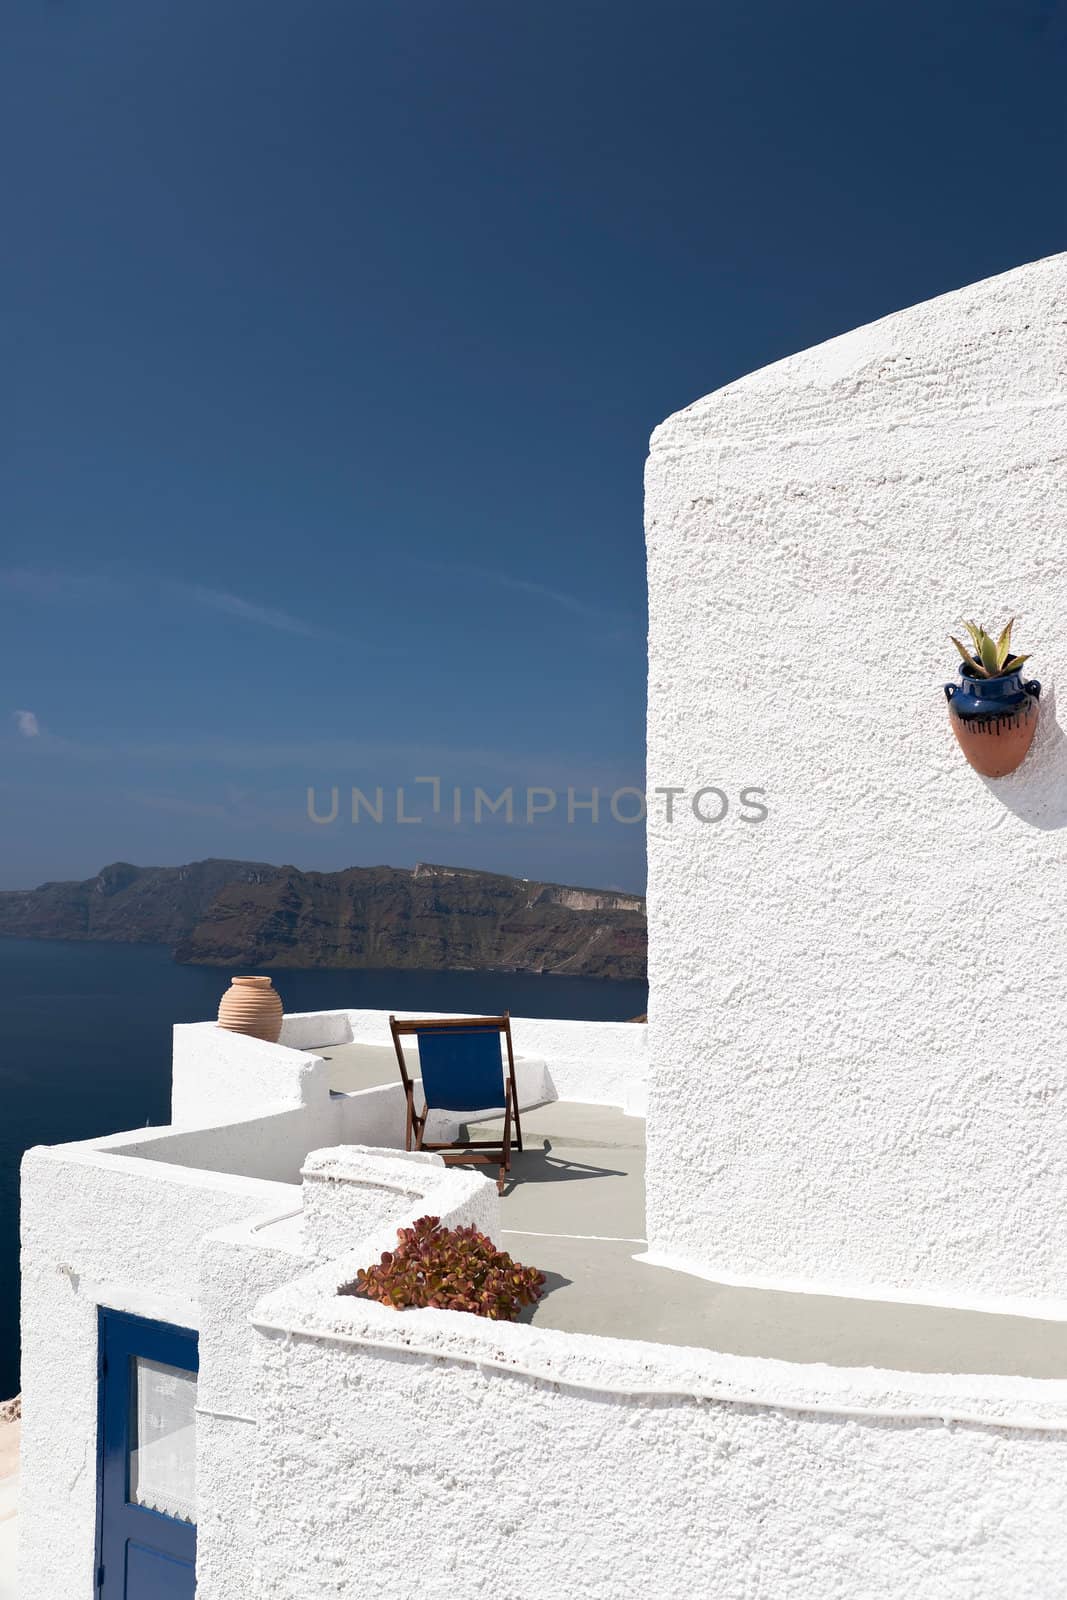 Whitewashed building and the island by mulden